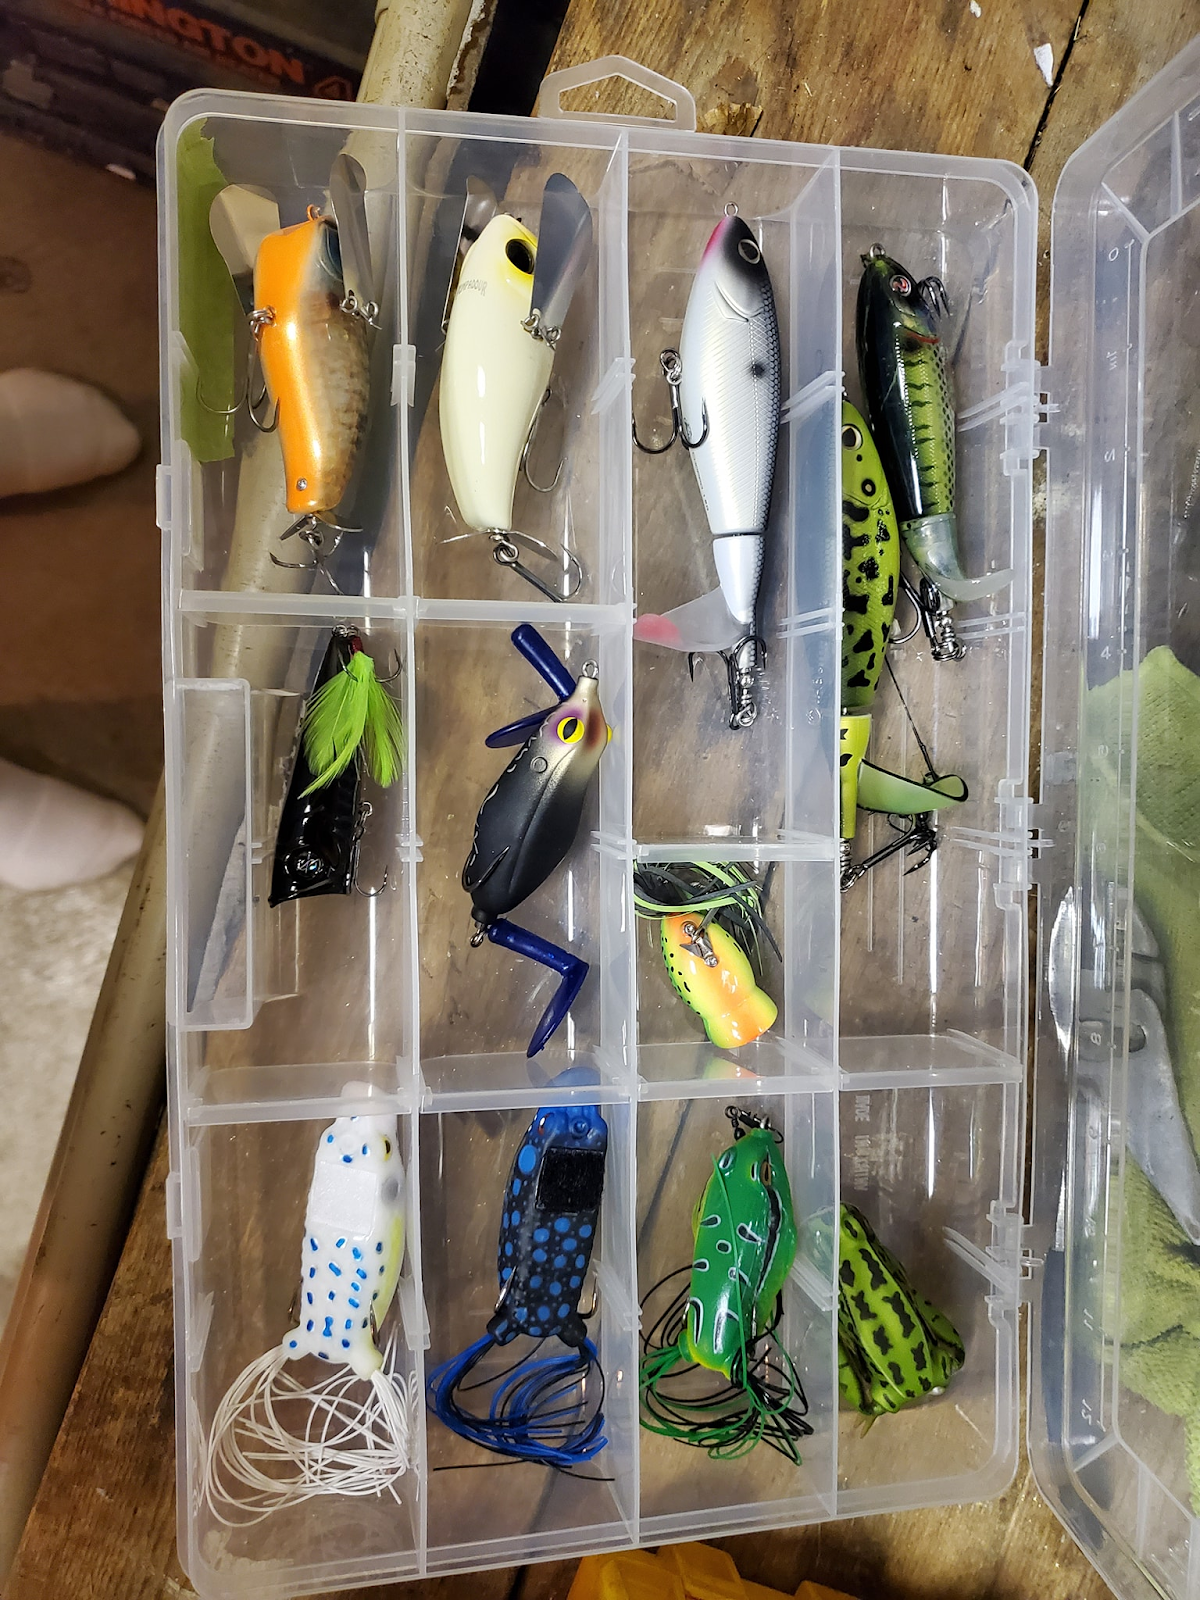 Best Topwater Lures - Best Bass Fishing Lures